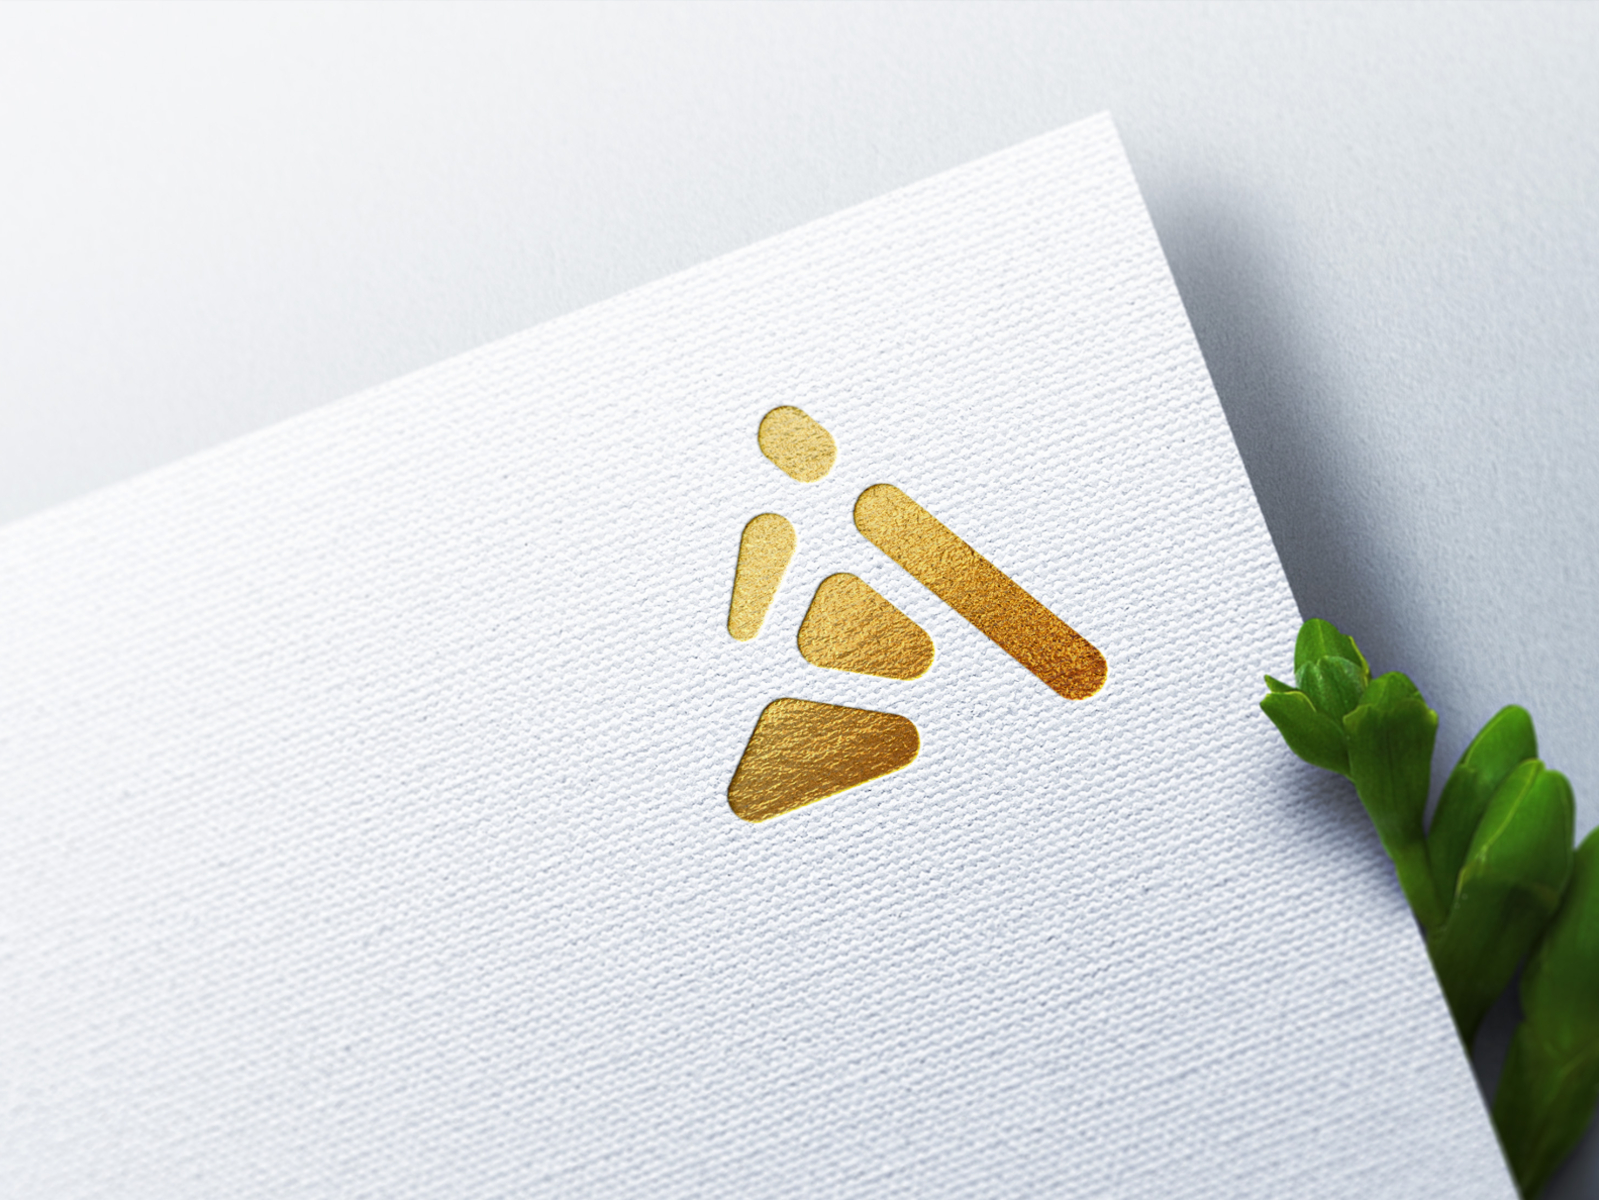 Download Luxury Logo Mockup on White Craft Paper | Premium PSD by Mithun Mitra on Dribbble